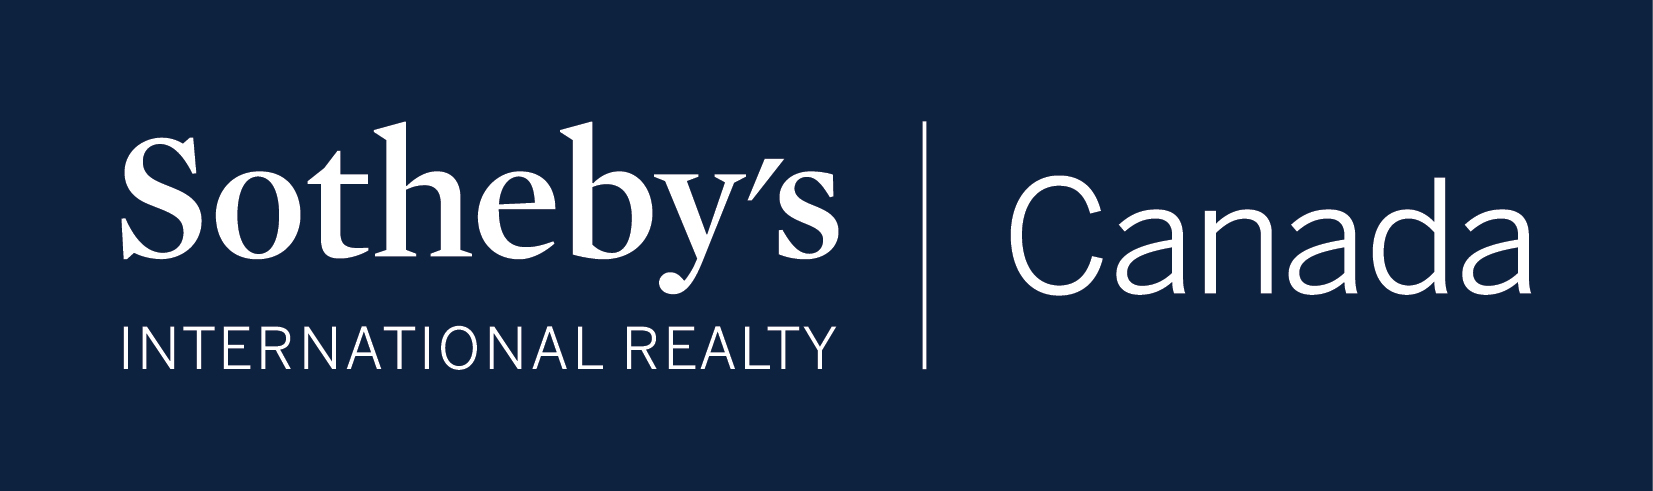 Sotheby's International Realty, Canada